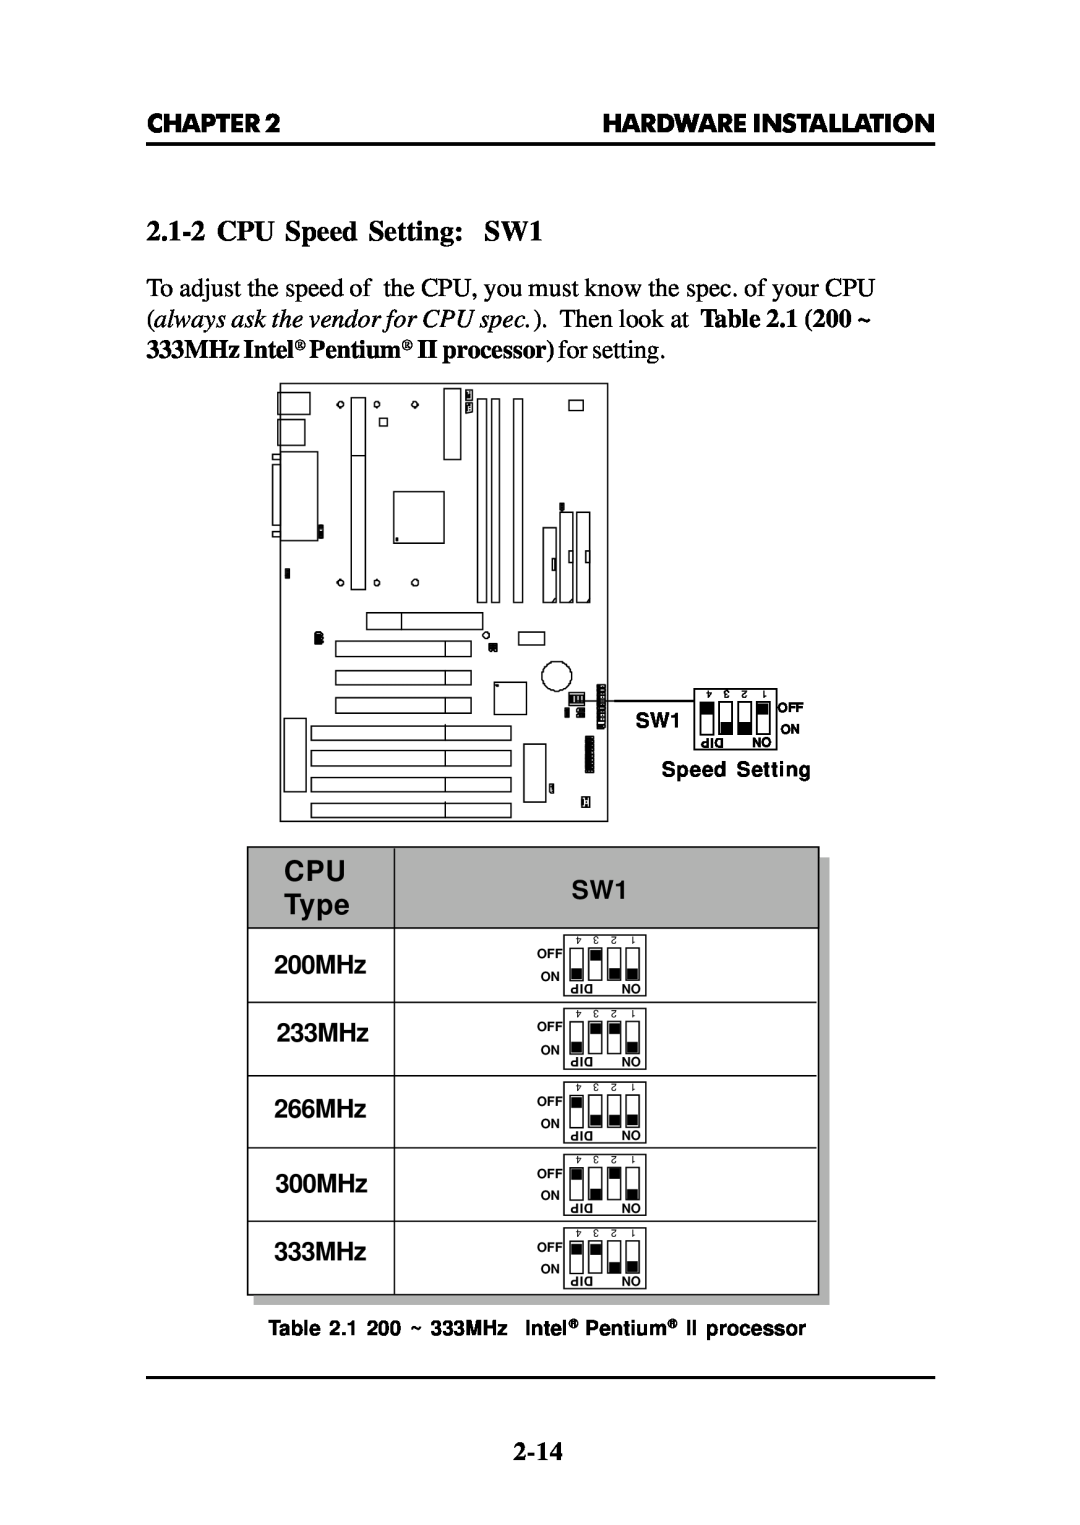 Intel MS-6112 manual 2.1-2CPU Speed Setting SW1, Type, 200MHz, 233MHz, 266MHz, 300MHz, 333MHz 